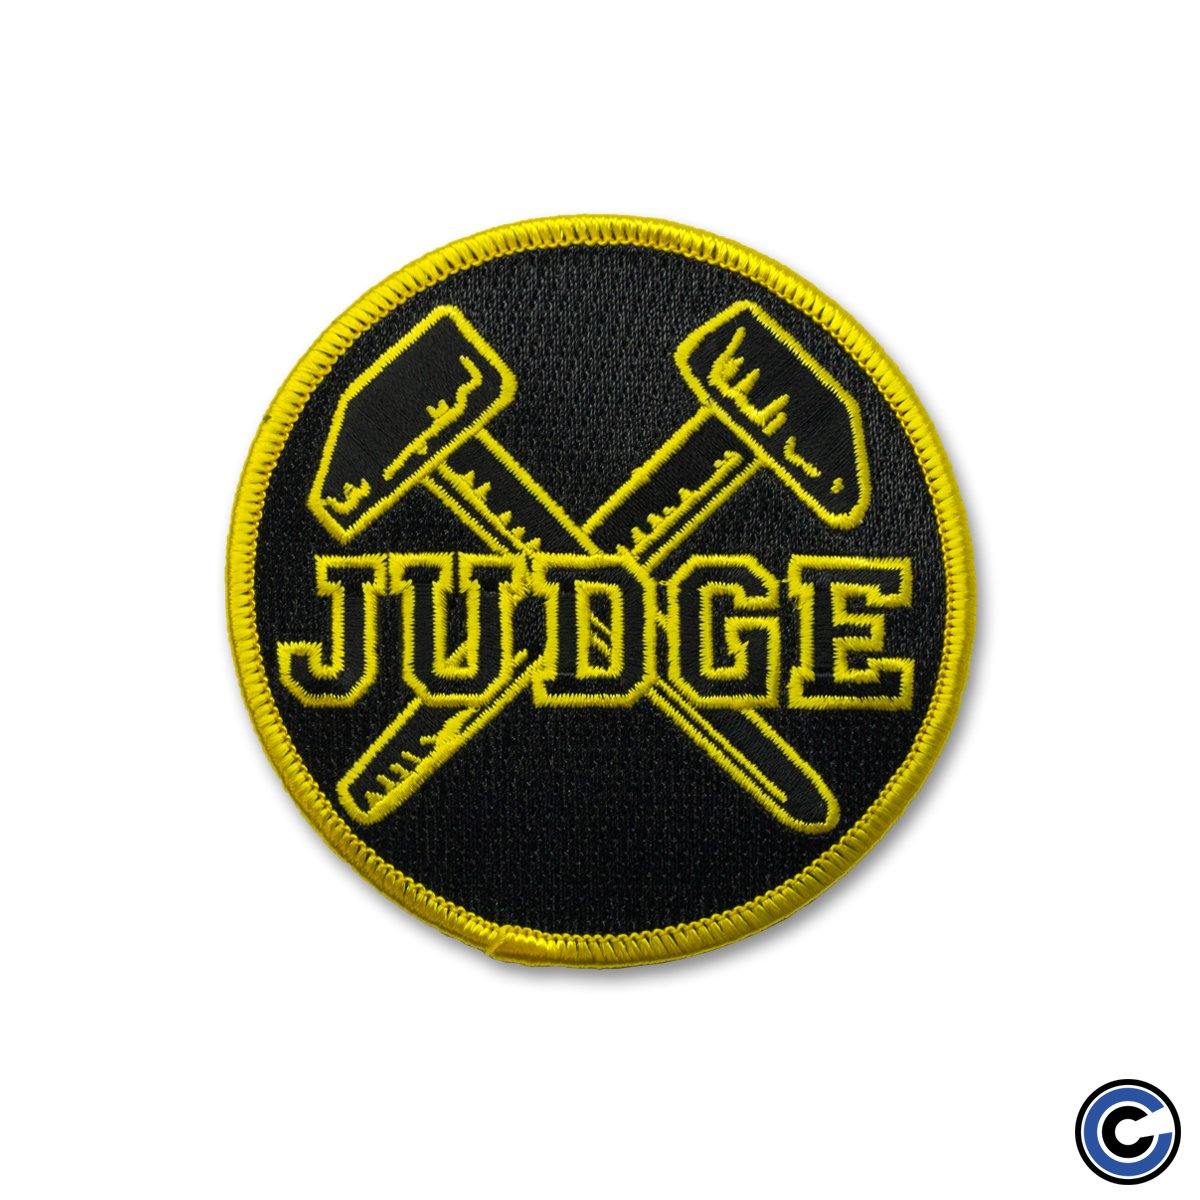 Buy – Judge "Hammers" Patch – Band & Music Merch – Cold Cuts Merch